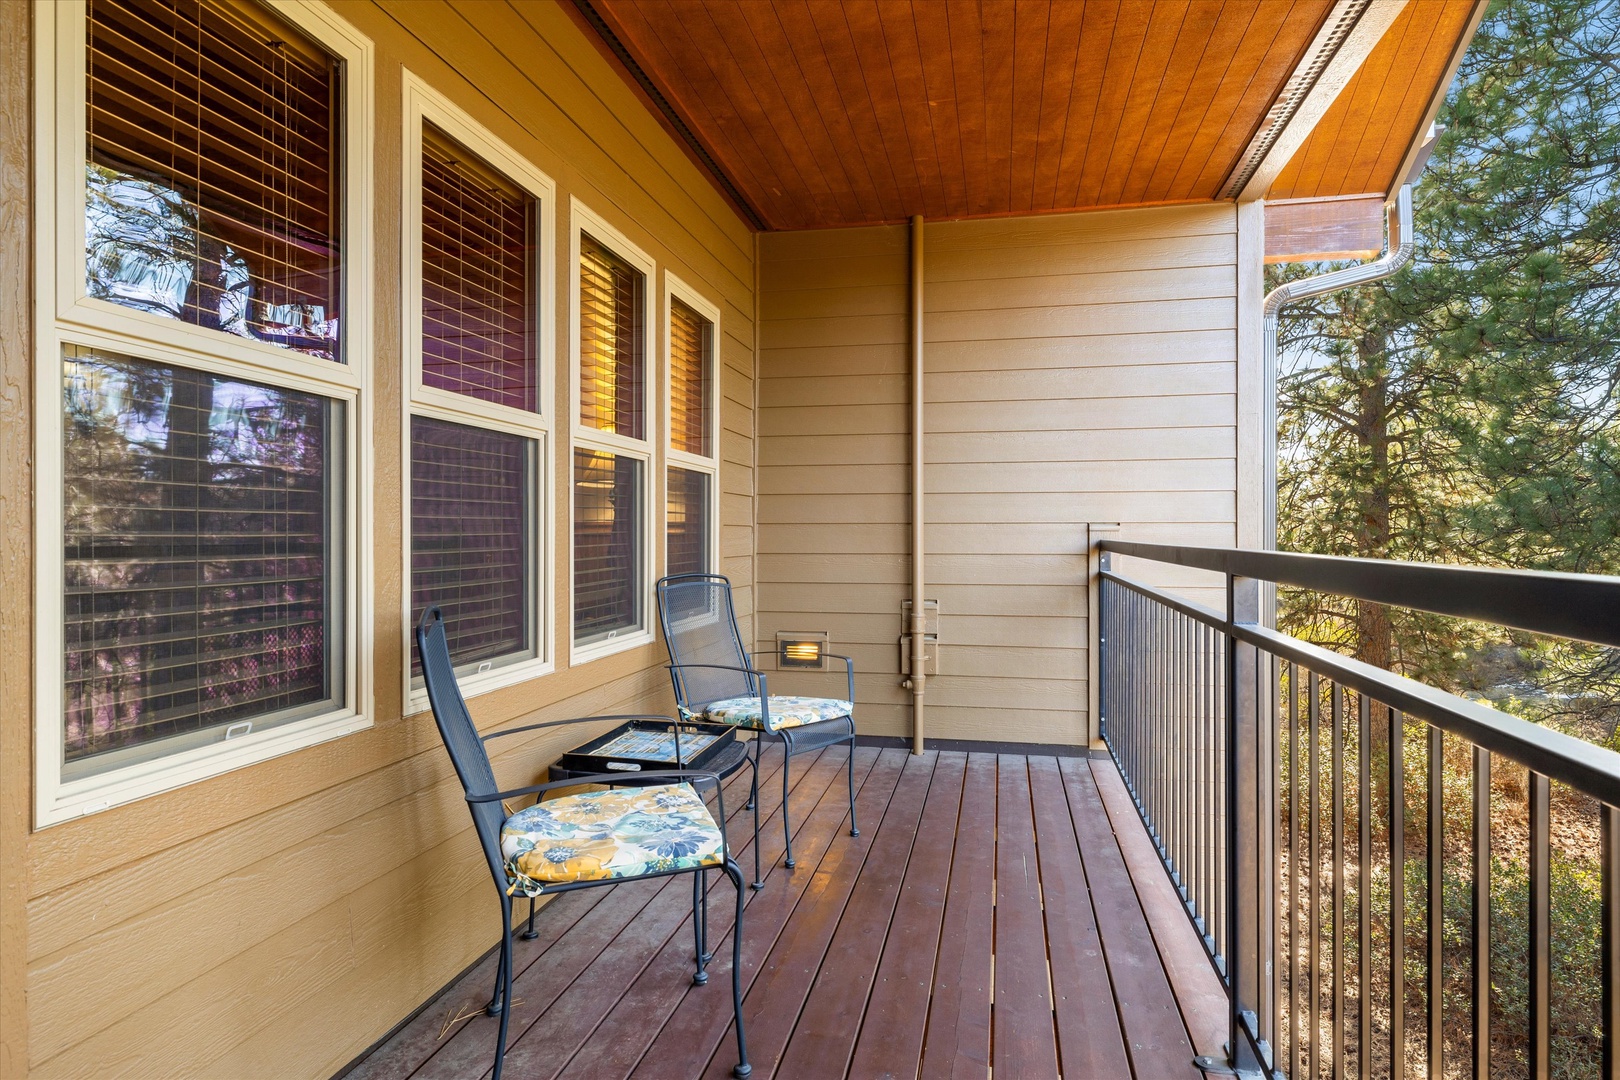 Step out onto the balcony and take in the fresh air with gorgeous views